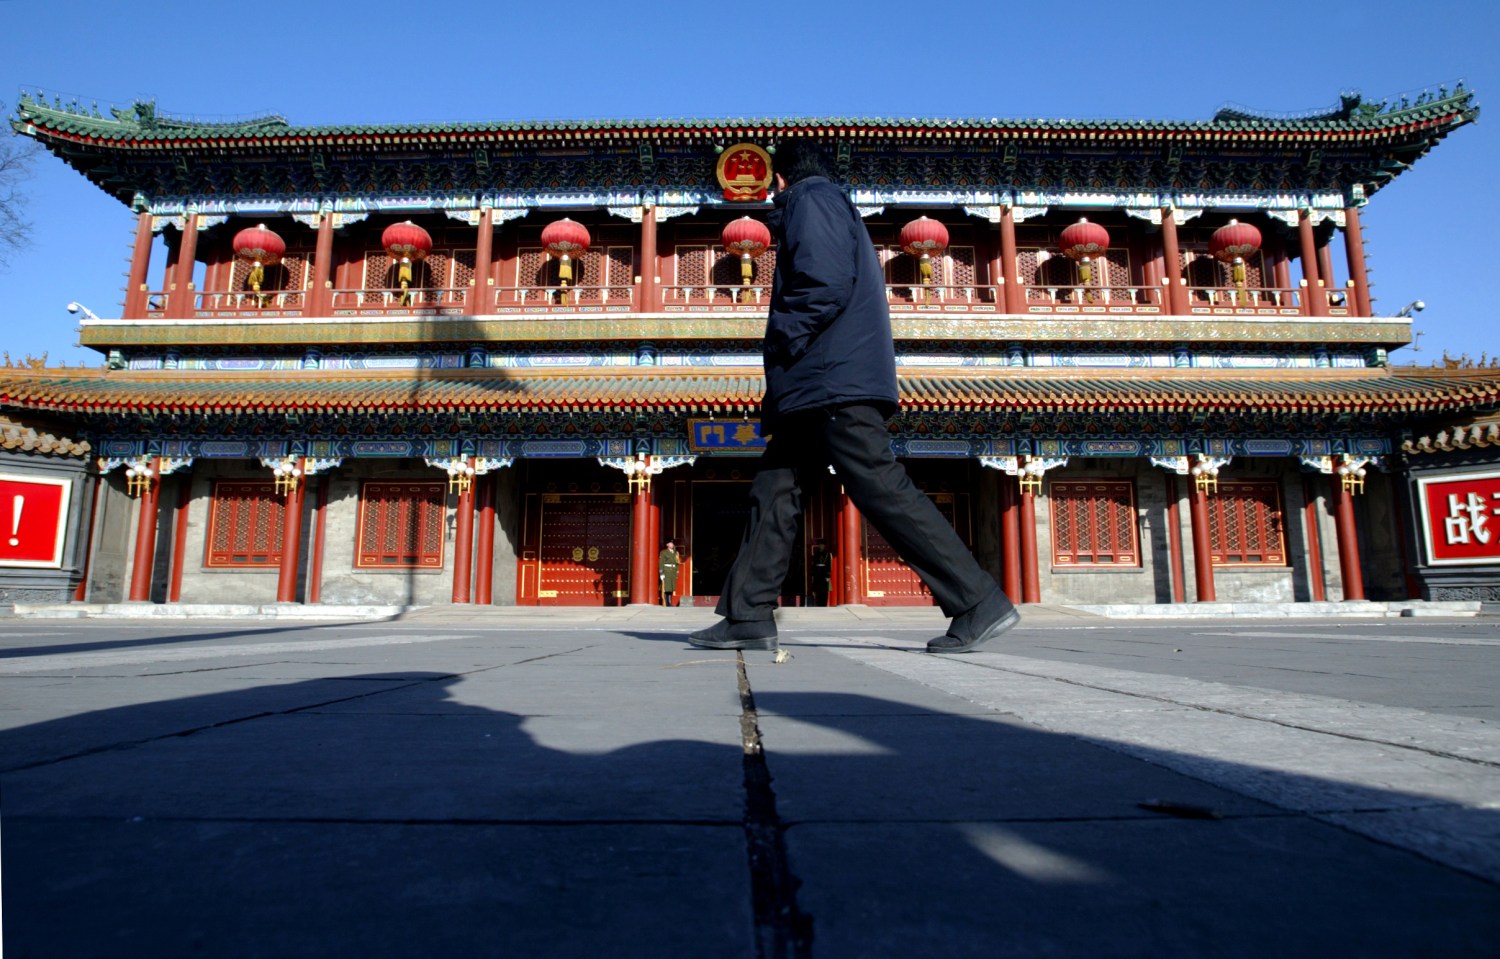 A Chinese man looks at the main gate of Zhongnanhai, the Chinese leadership compound, in central Beijing, January 12, 2004. The Chinese Communist Party will launch its first "Party Supervisor Regulation" during a meeting of the Central Discipline Inspection Commission which starts in middle of January. The Commission is the Party's corruption watchdog. The regulation will pave the way for inspection of China's top leaders in the central government and provinces, the semi-official China News Service reported. NO RIGHTS CLEARANCES OR PERMISSIONS ARE REQUIRED FOR THIS IMAGE REUTERS/Guang Niu   GN/TW - RP4DRIIDKXAA